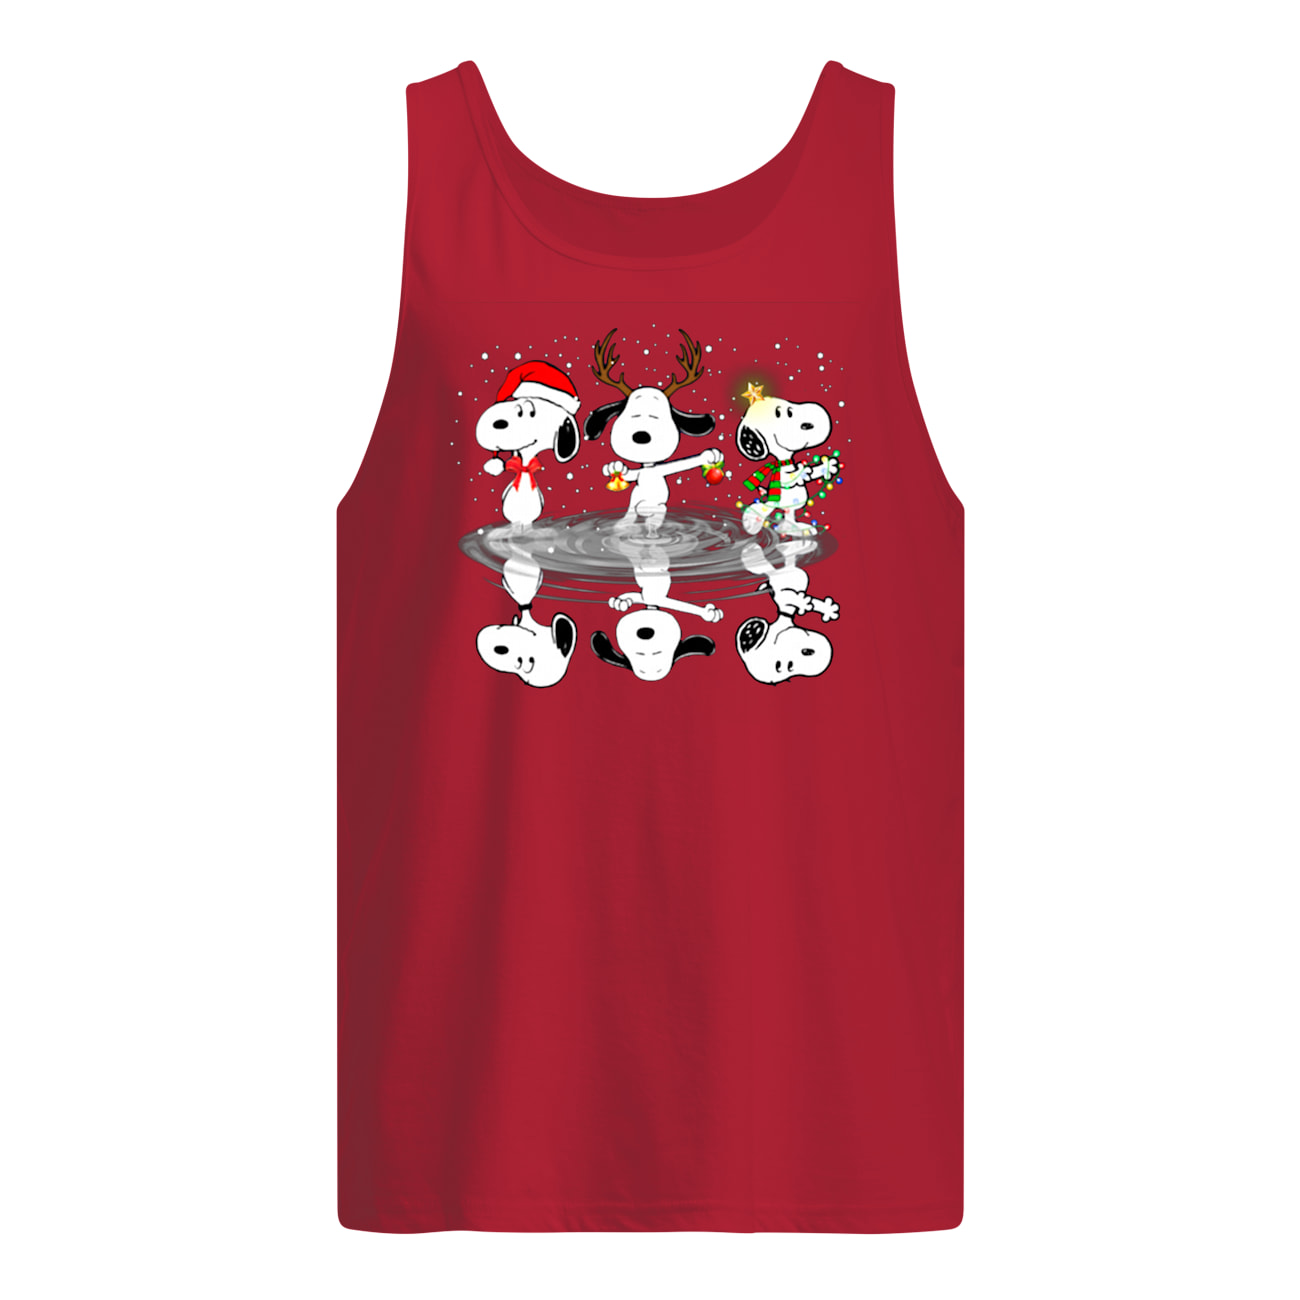 Peanuts snoopy water reflection mirror christmas tank top